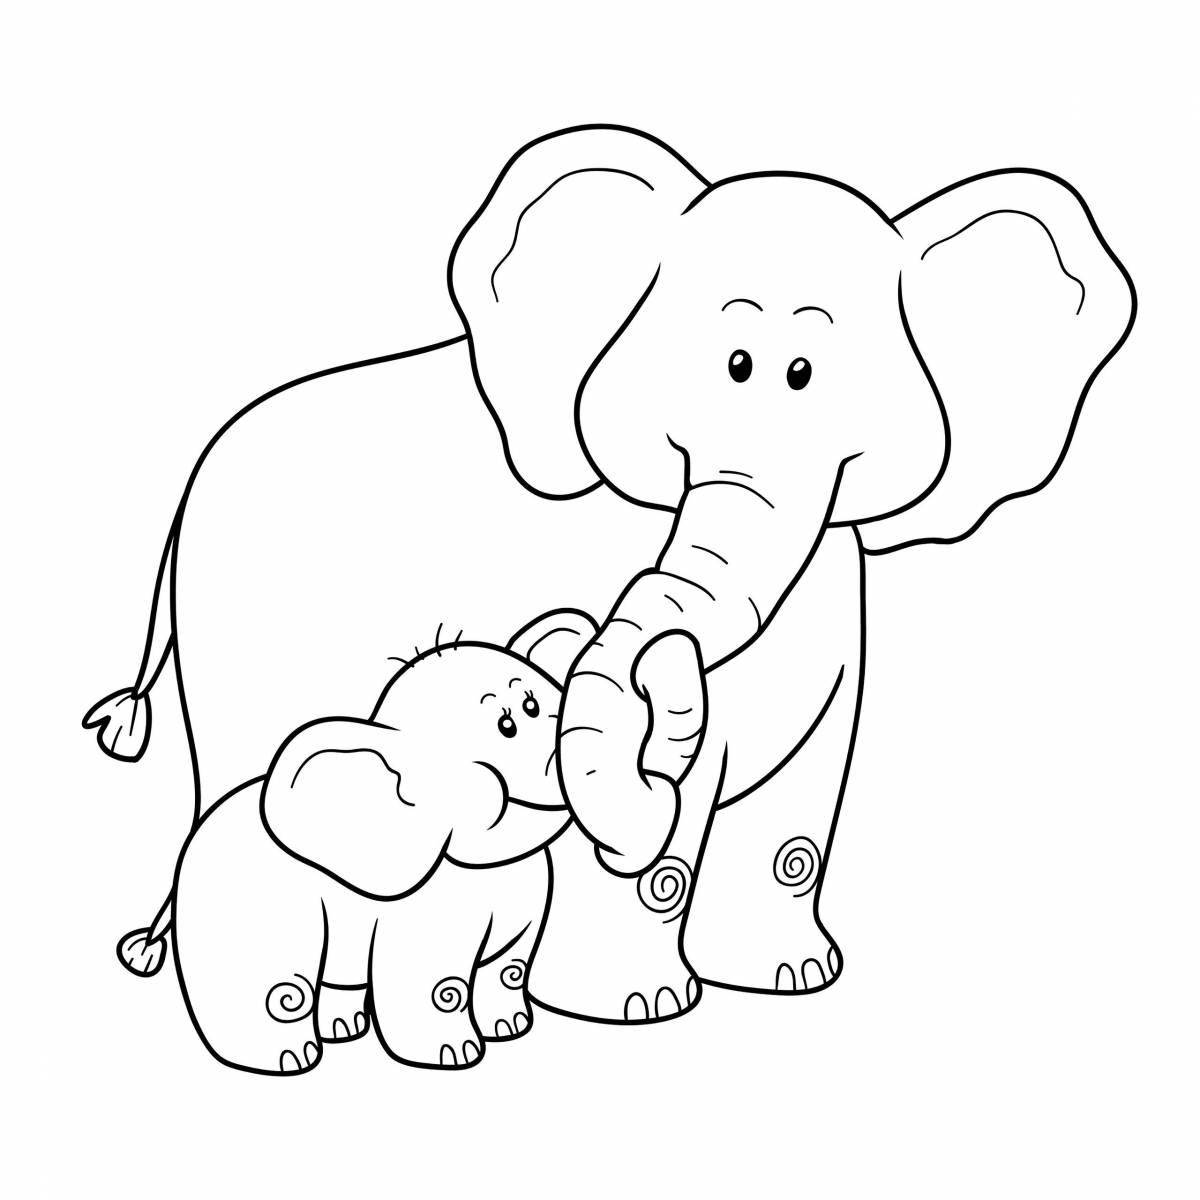 Charming elephant coloring by numbers